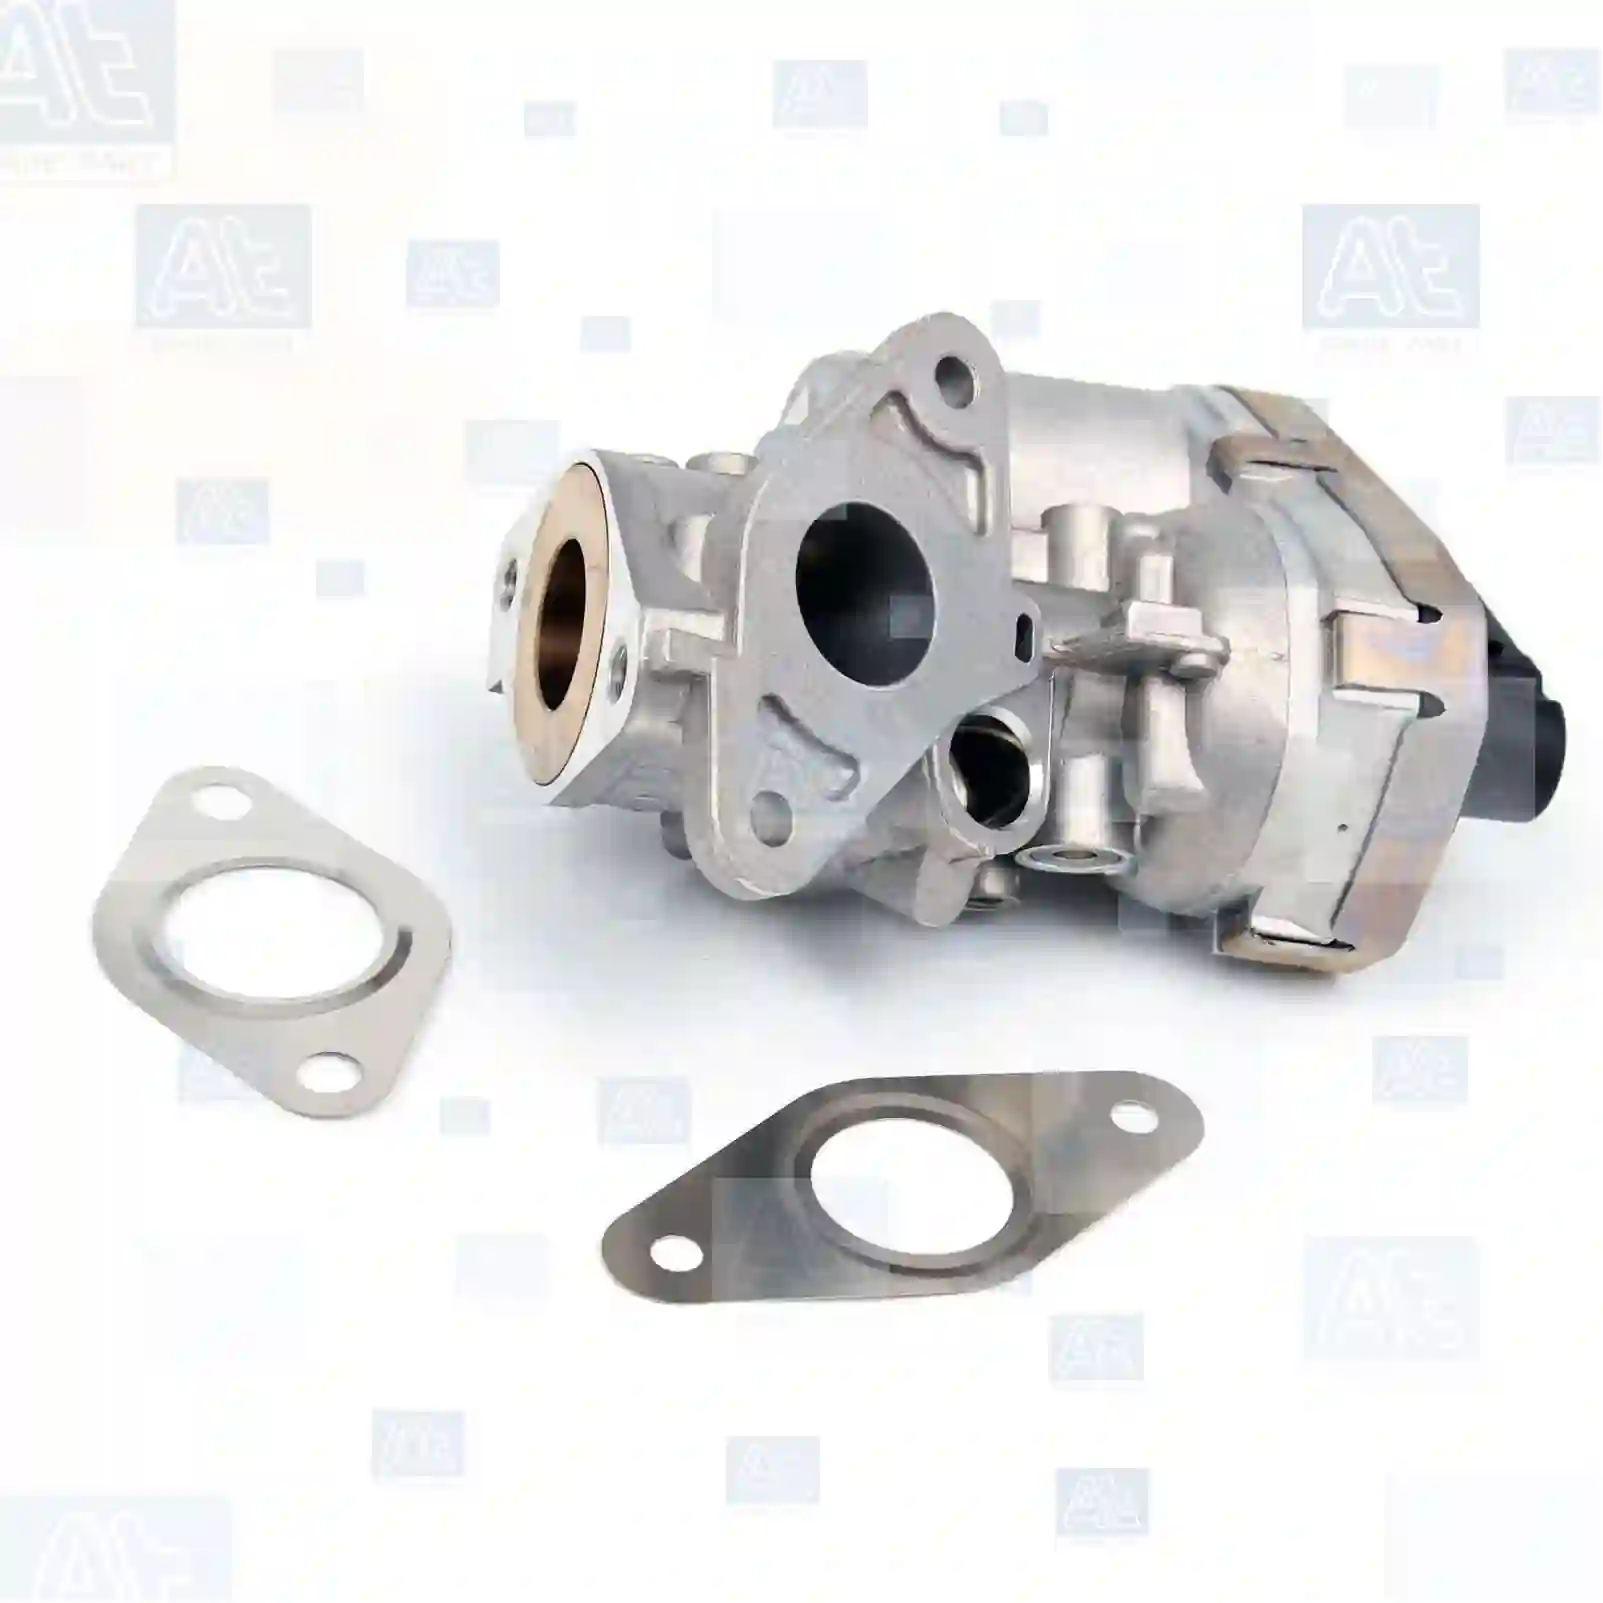 Valve, exhaust gas recirculation, 77701028, 71789686, 71793436, 9659694780, 9665752480, 1618HQ, 1618R5, 71789686, 71793436, 9659694780, 9665752480, 96657524, 1384616, 1466340, 1480560, 1715125, 1787017, 1788657, 6C1Q-9D475-AF, 6C1Q-9D475-AG, 8C1Q-9D475-BA, 71789686, 71793436, 9659694780, 9665752480, LR006650, 1618HQ, 1618R5, 14330, EGR192, ERV103 ||  77701028 At Spare Part | Engine, Accelerator Pedal, Camshaft, Connecting Rod, Crankcase, Crankshaft, Cylinder Head, Engine Suspension Mountings, Exhaust Manifold, Exhaust Gas Recirculation, Filter Kits, Flywheel Housing, General Overhaul Kits, Engine, Intake Manifold, Oil Cleaner, Oil Cooler, Oil Filter, Oil Pump, Oil Sump, Piston & Liner, Sensor & Switch, Timing Case, Turbocharger, Cooling System, Belt Tensioner, Coolant Filter, Coolant Pipe, Corrosion Prevention Agent, Drive, Expansion Tank, Fan, Intercooler, Monitors & Gauges, Radiator, Thermostat, V-Belt / Timing belt, Water Pump, Fuel System, Electronical Injector Unit, Feed Pump, Fuel Filter, cpl., Fuel Gauge Sender,  Fuel Line, Fuel Pump, Fuel Tank, Injection Line Kit, Injection Pump, Exhaust System, Clutch & Pedal, Gearbox, Propeller Shaft, Axles, Brake System, Hubs & Wheels, Suspension, Leaf Spring, Universal Parts / Accessories, Steering, Electrical System, Cabin Valve, exhaust gas recirculation, 77701028, 71789686, 71793436, 9659694780, 9665752480, 1618HQ, 1618R5, 71789686, 71793436, 9659694780, 9665752480, 96657524, 1384616, 1466340, 1480560, 1715125, 1787017, 1788657, 6C1Q-9D475-AF, 6C1Q-9D475-AG, 8C1Q-9D475-BA, 71789686, 71793436, 9659694780, 9665752480, LR006650, 1618HQ, 1618R5, 14330, EGR192, ERV103 ||  77701028 At Spare Part | Engine, Accelerator Pedal, Camshaft, Connecting Rod, Crankcase, Crankshaft, Cylinder Head, Engine Suspension Mountings, Exhaust Manifold, Exhaust Gas Recirculation, Filter Kits, Flywheel Housing, General Overhaul Kits, Engine, Intake Manifold, Oil Cleaner, Oil Cooler, Oil Filter, Oil Pump, Oil Sump, Piston & Liner, Sensor & Switch, Timing Case, Turbocharger, Cooling System, Belt Tensioner, Coolant Filter, Coolant Pipe, Corrosion Prevention Agent, Drive, Expansion Tank, Fan, Intercooler, Monitors & Gauges, Radiator, Thermostat, V-Belt / Timing belt, Water Pump, Fuel System, Electronical Injector Unit, Feed Pump, Fuel Filter, cpl., Fuel Gauge Sender,  Fuel Line, Fuel Pump, Fuel Tank, Injection Line Kit, Injection Pump, Exhaust System, Clutch & Pedal, Gearbox, Propeller Shaft, Axles, Brake System, Hubs & Wheels, Suspension, Leaf Spring, Universal Parts / Accessories, Steering, Electrical System, Cabin